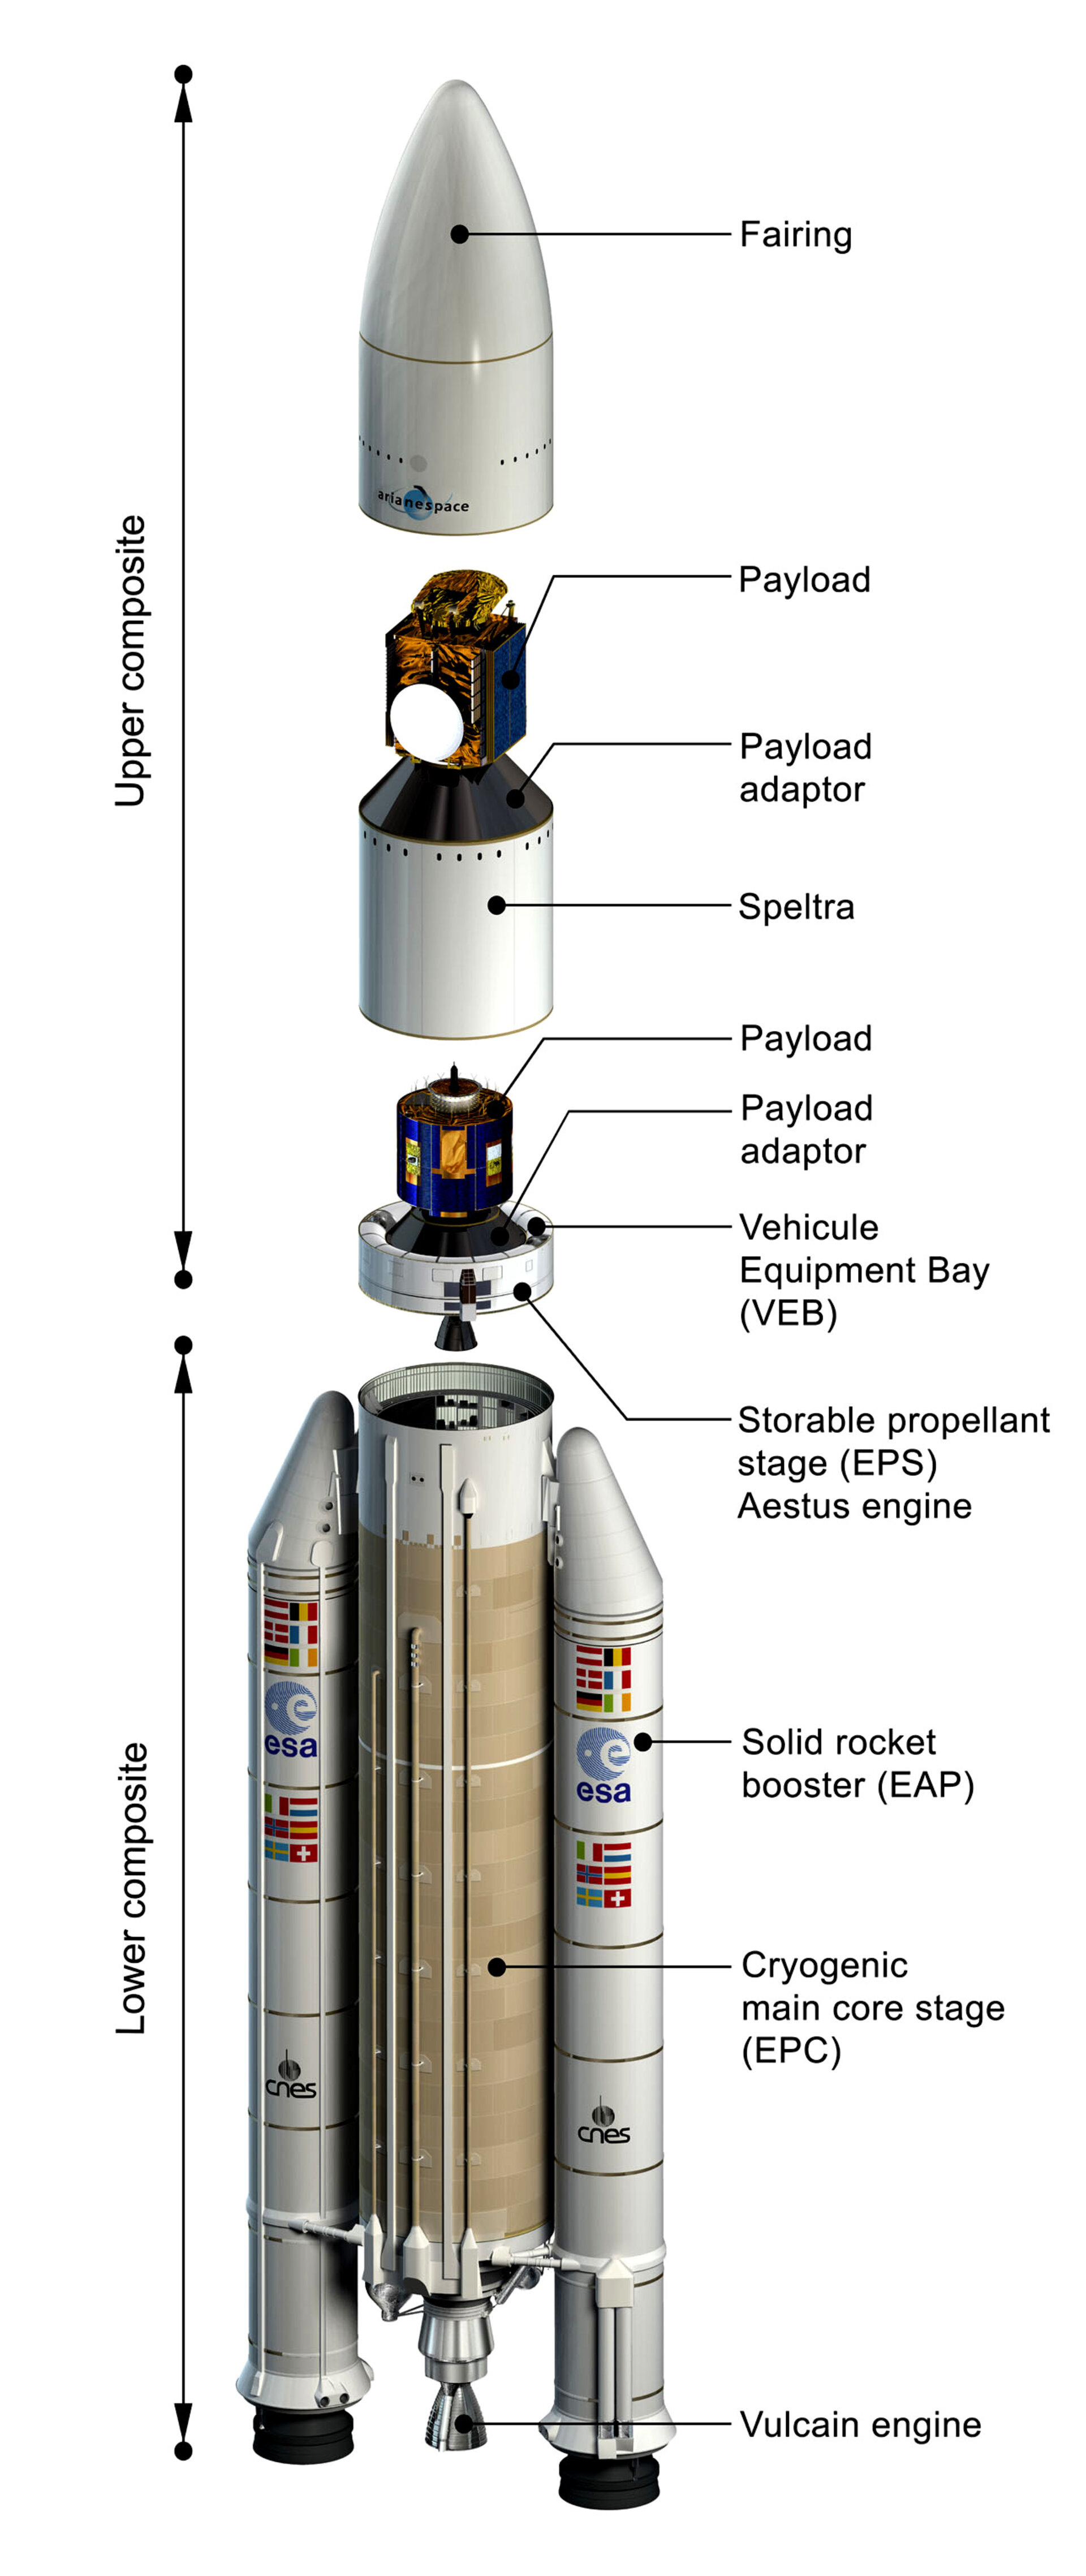 Components of an Ariane 5G launcher